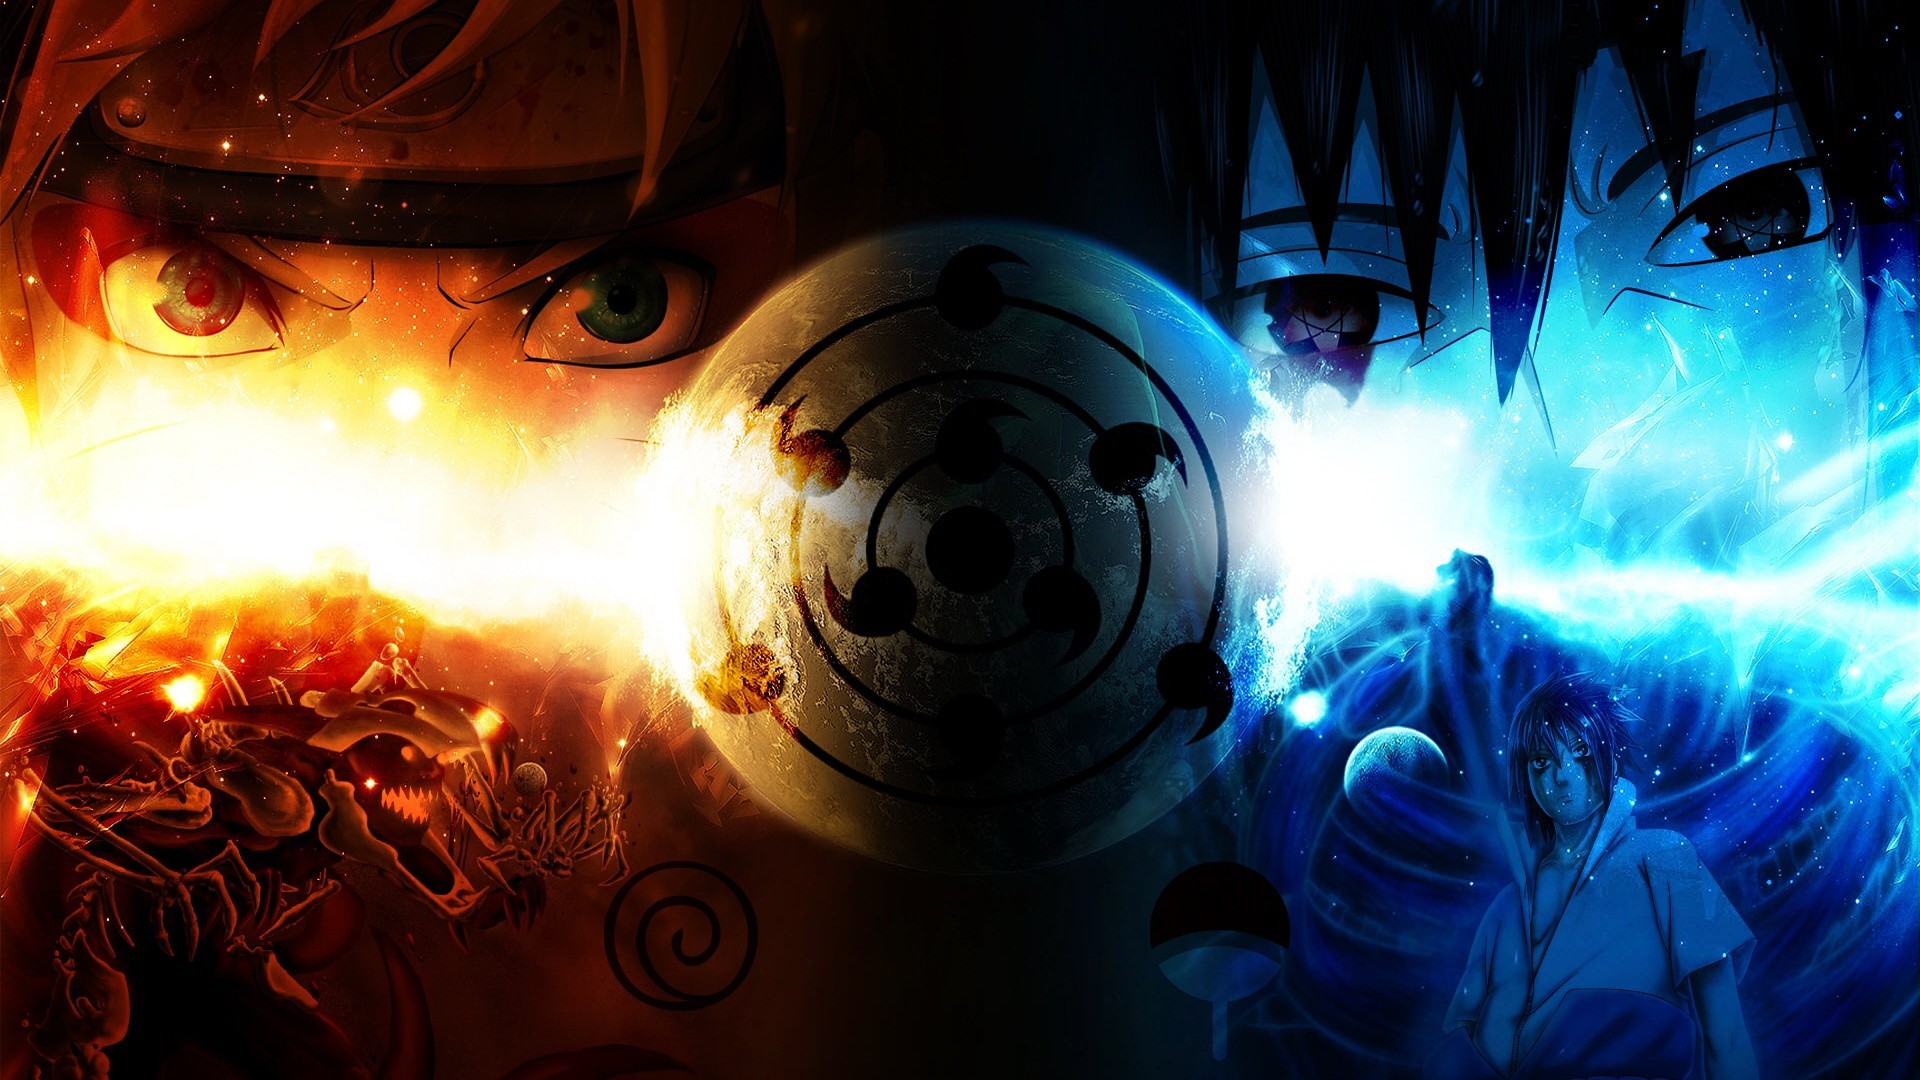 10 Best Naruto Wallpaper Hd 1920X1080 FULL HD 1080p For PC Background